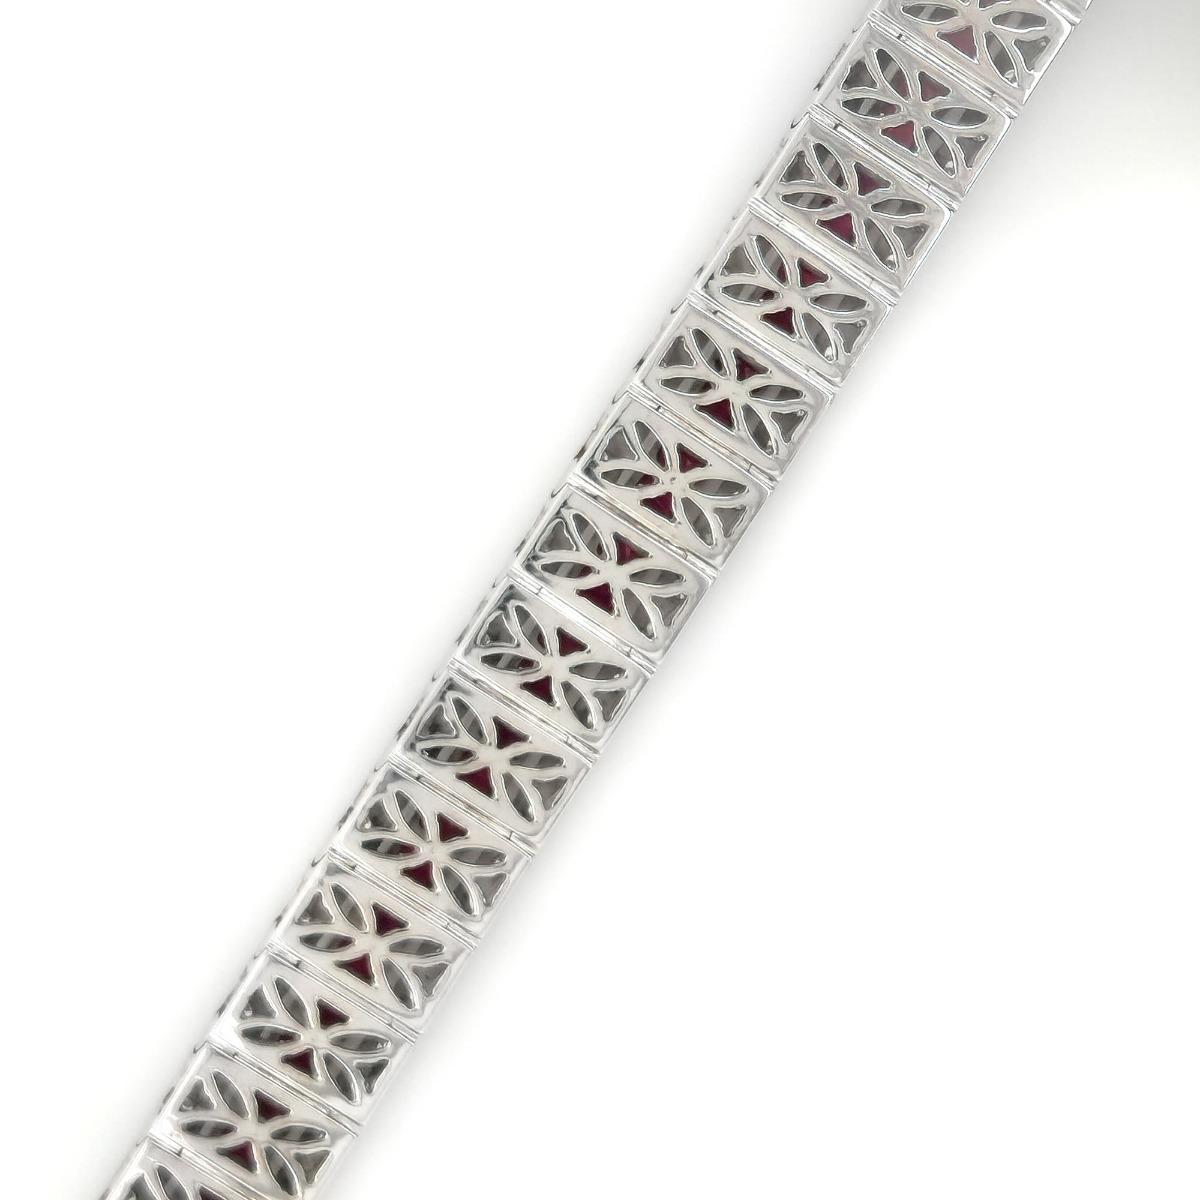 Princess Cut Natural Rubies 5.04 Carats in 14K White Gold Bracelet with Diamonds